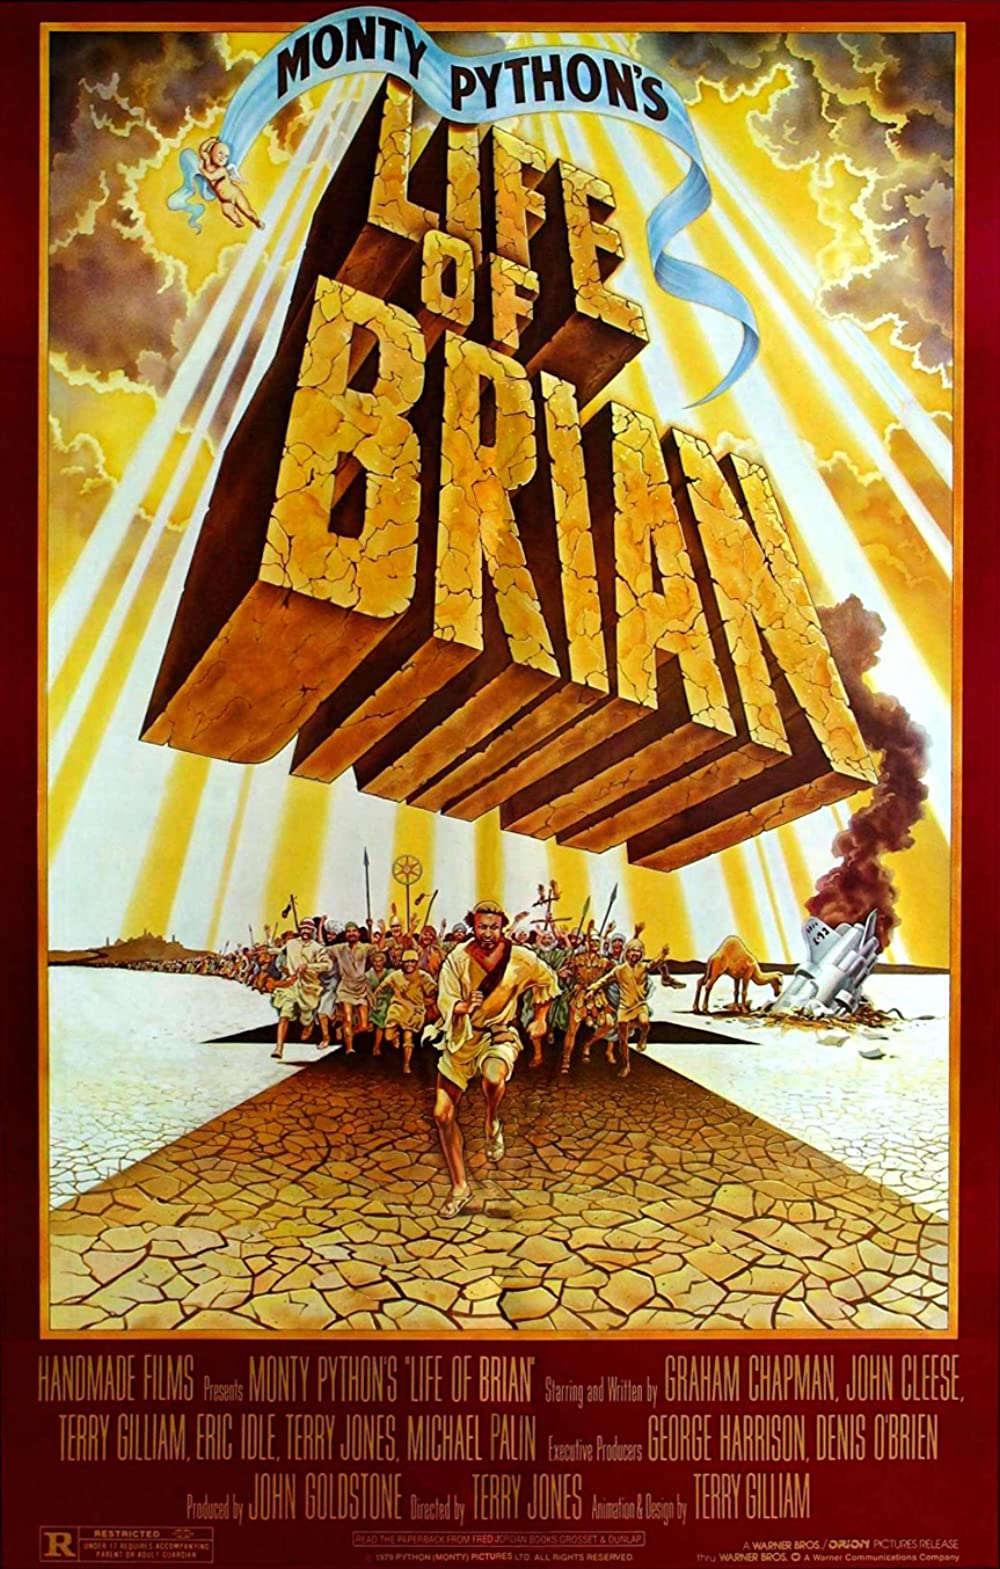 Brian élete – The Life of Brian